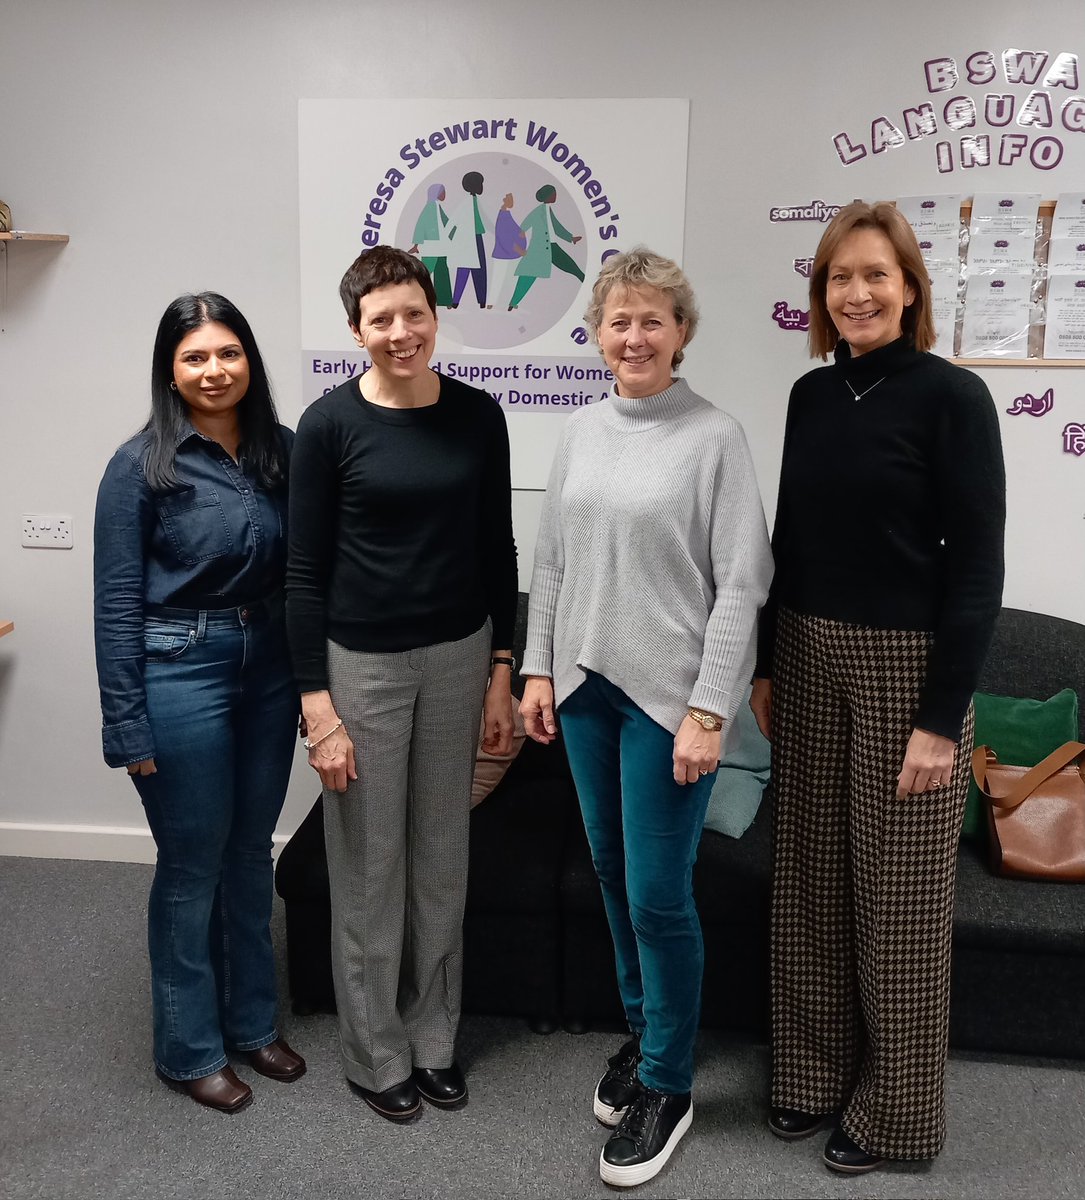 Lovely to welcome Ann and Louise from Edgbaston Golf Club to the Theresa Stewart Women’s Centre this morning. We are incredibly grateful for their interest in our work and for choosing to support women and children experiencing domestic abuse.